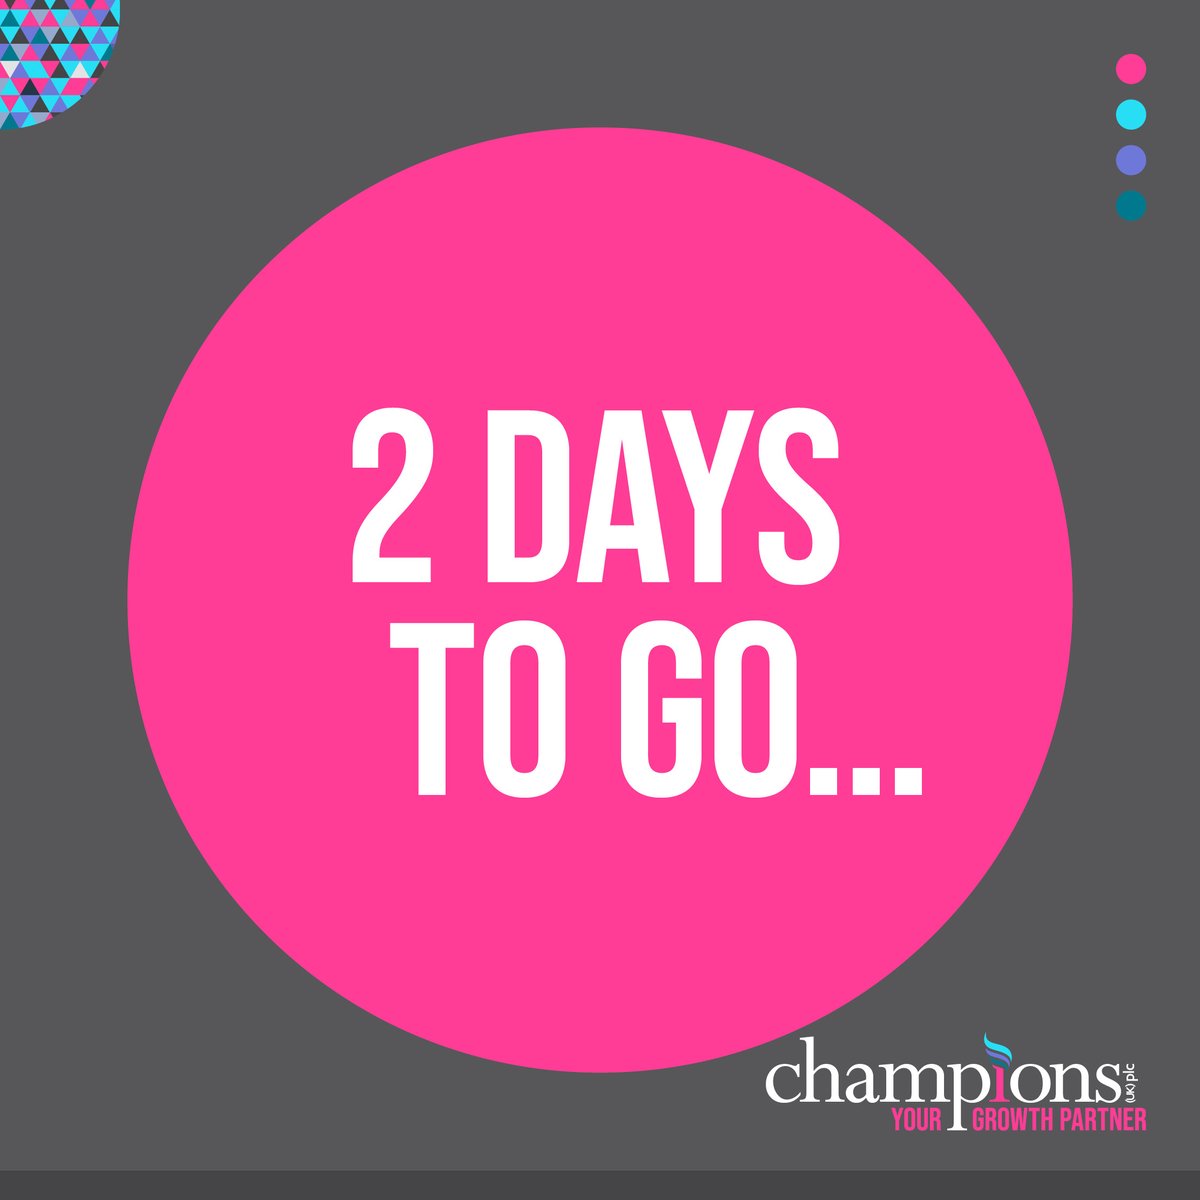 Our team have been working towards something huge over the last year... All will be revealed on Friday. #ChampionsUK #Development #BusinessGrowth